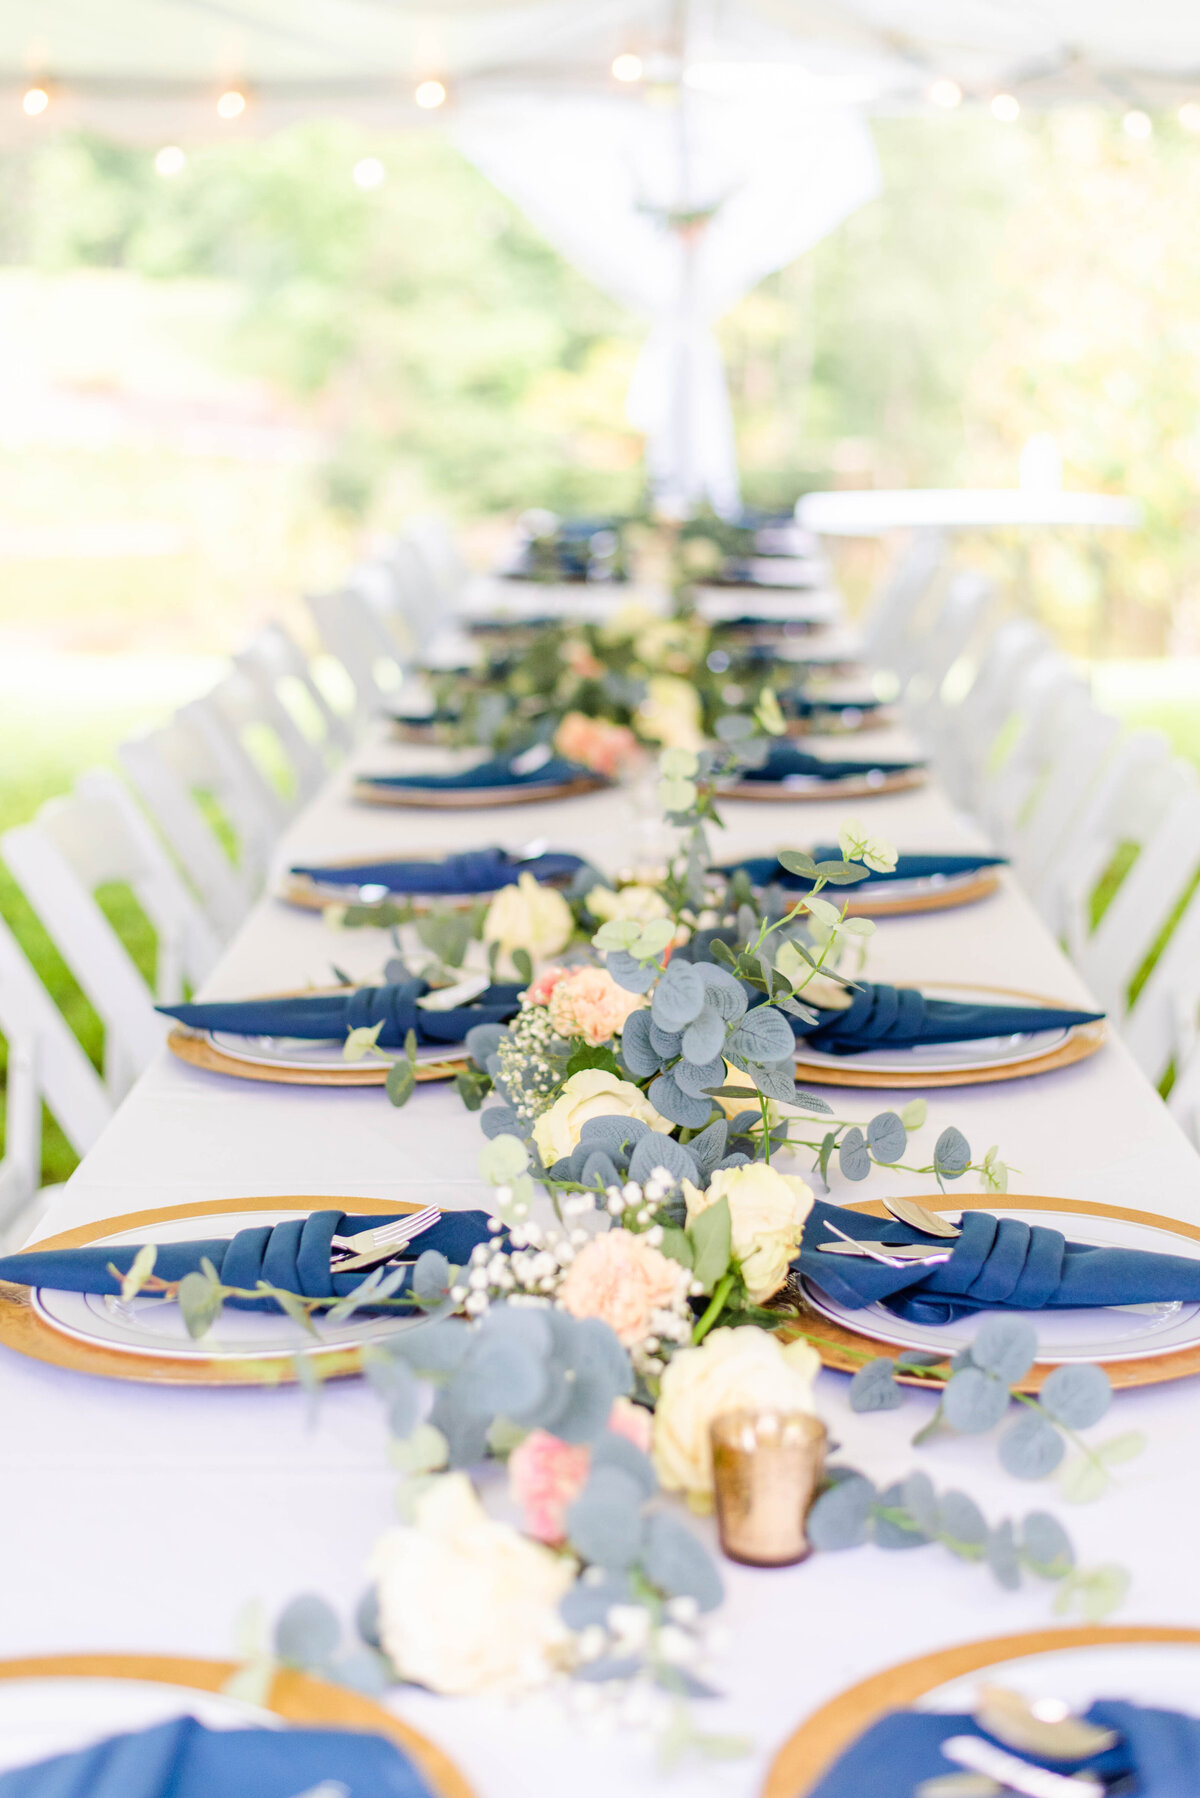 elegantly set table for a blue and white themed wedding